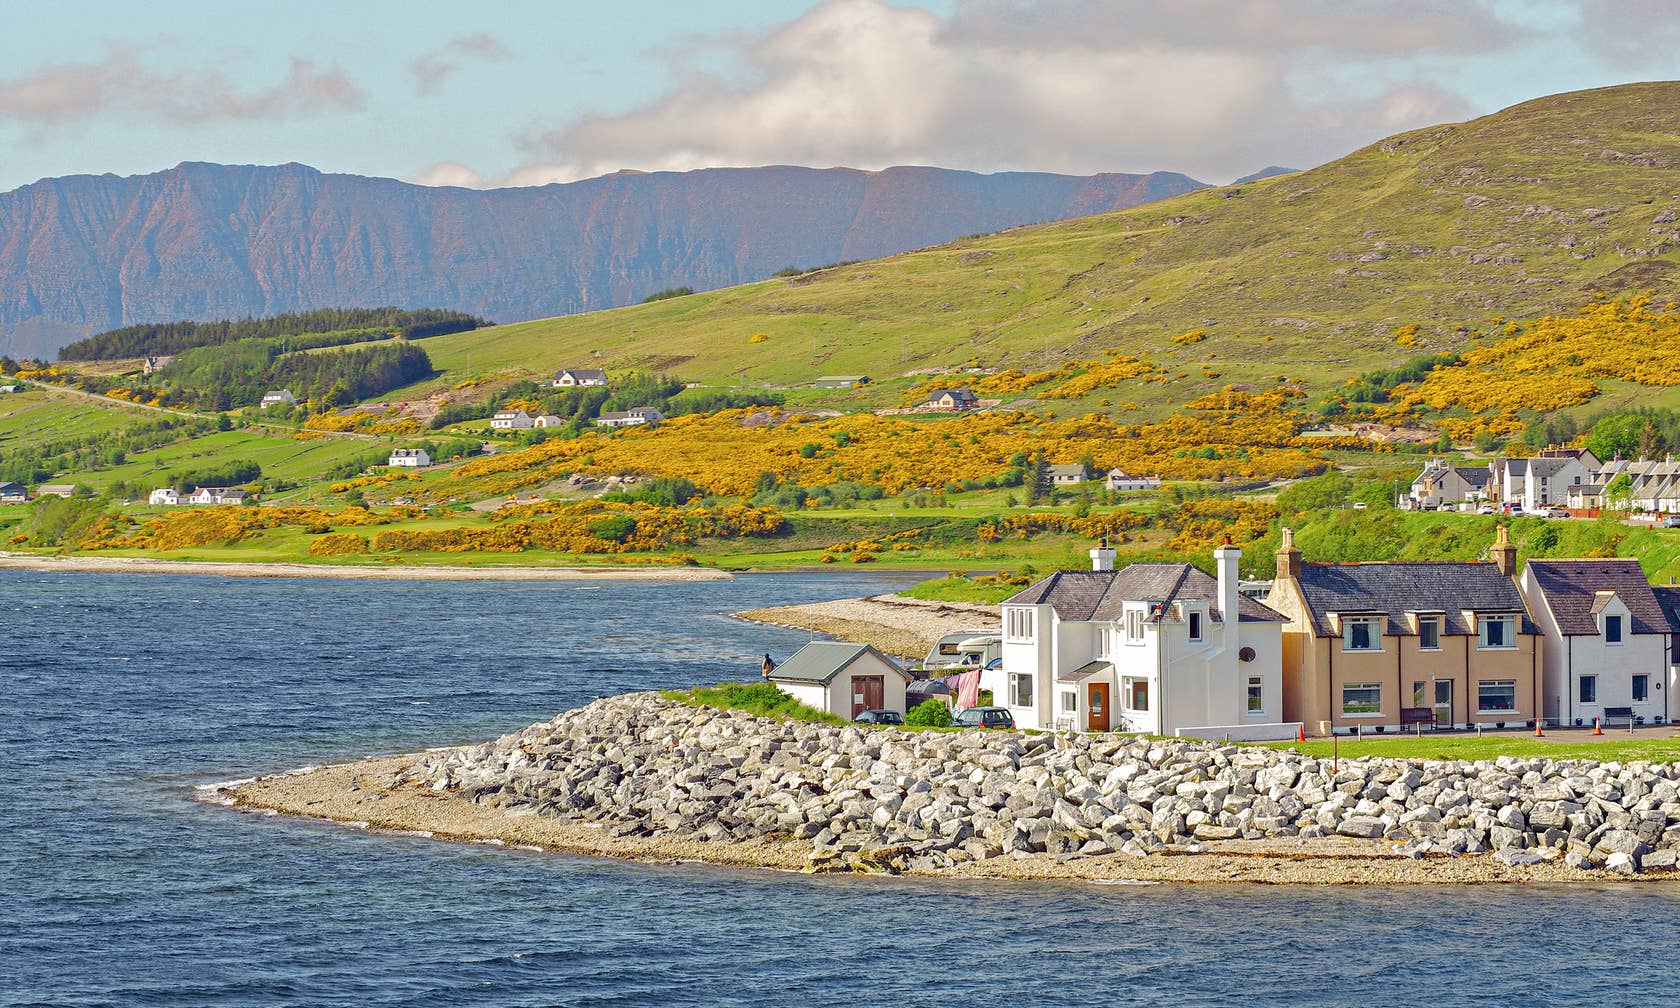 Holiday rentals in Ullapool